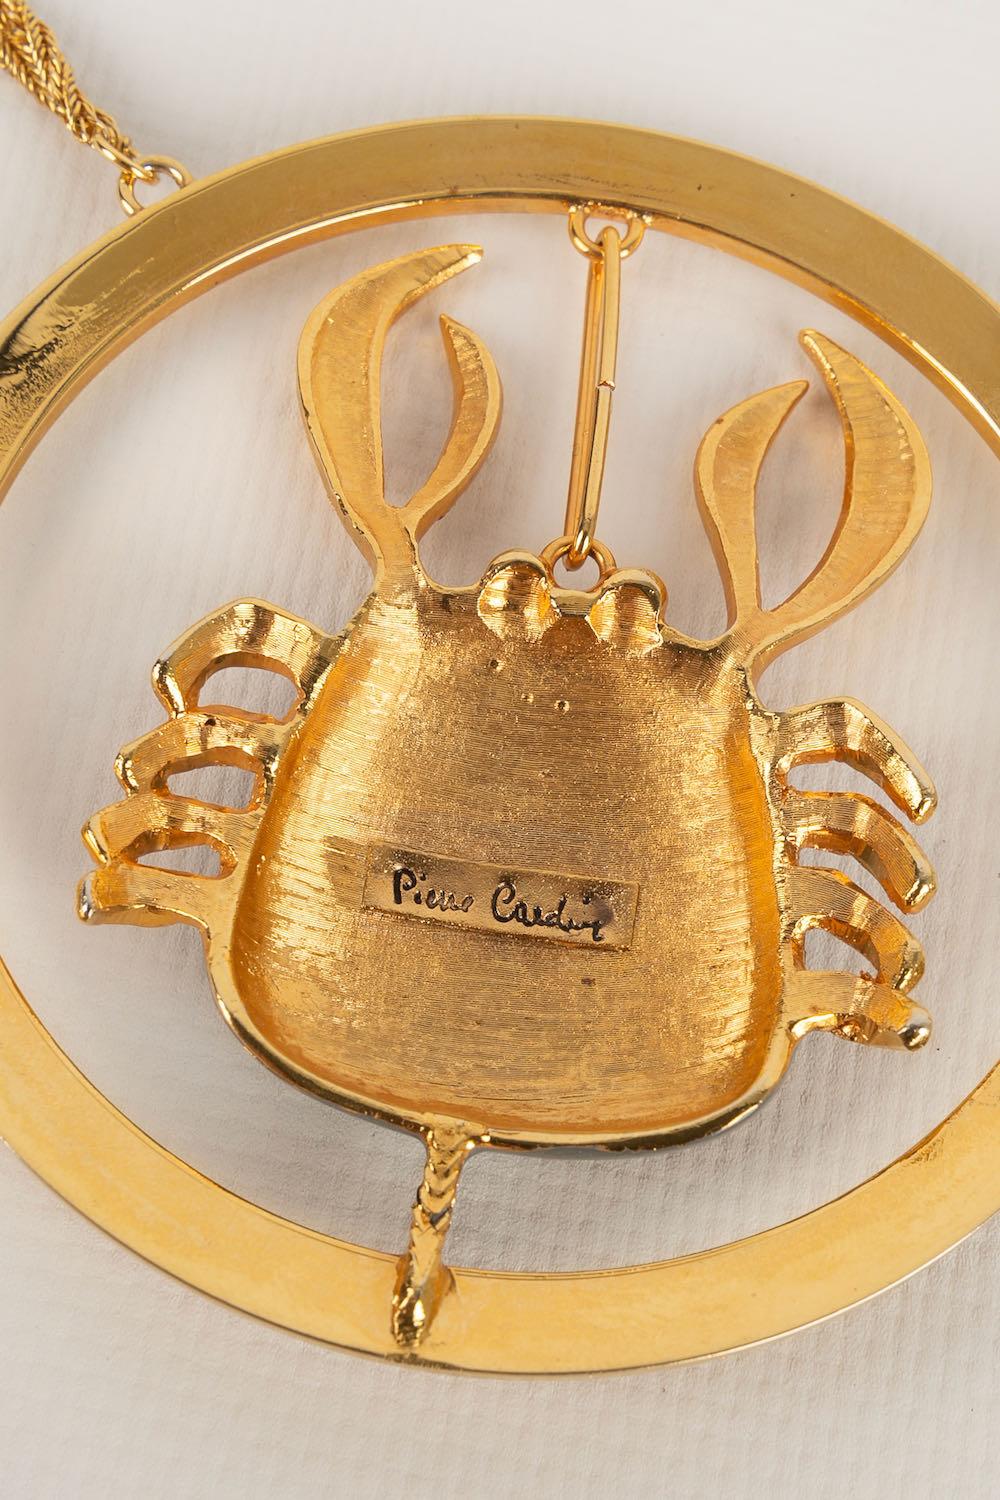 Pierre Cardin Crab Necklace in Golden Metal For Sale 1